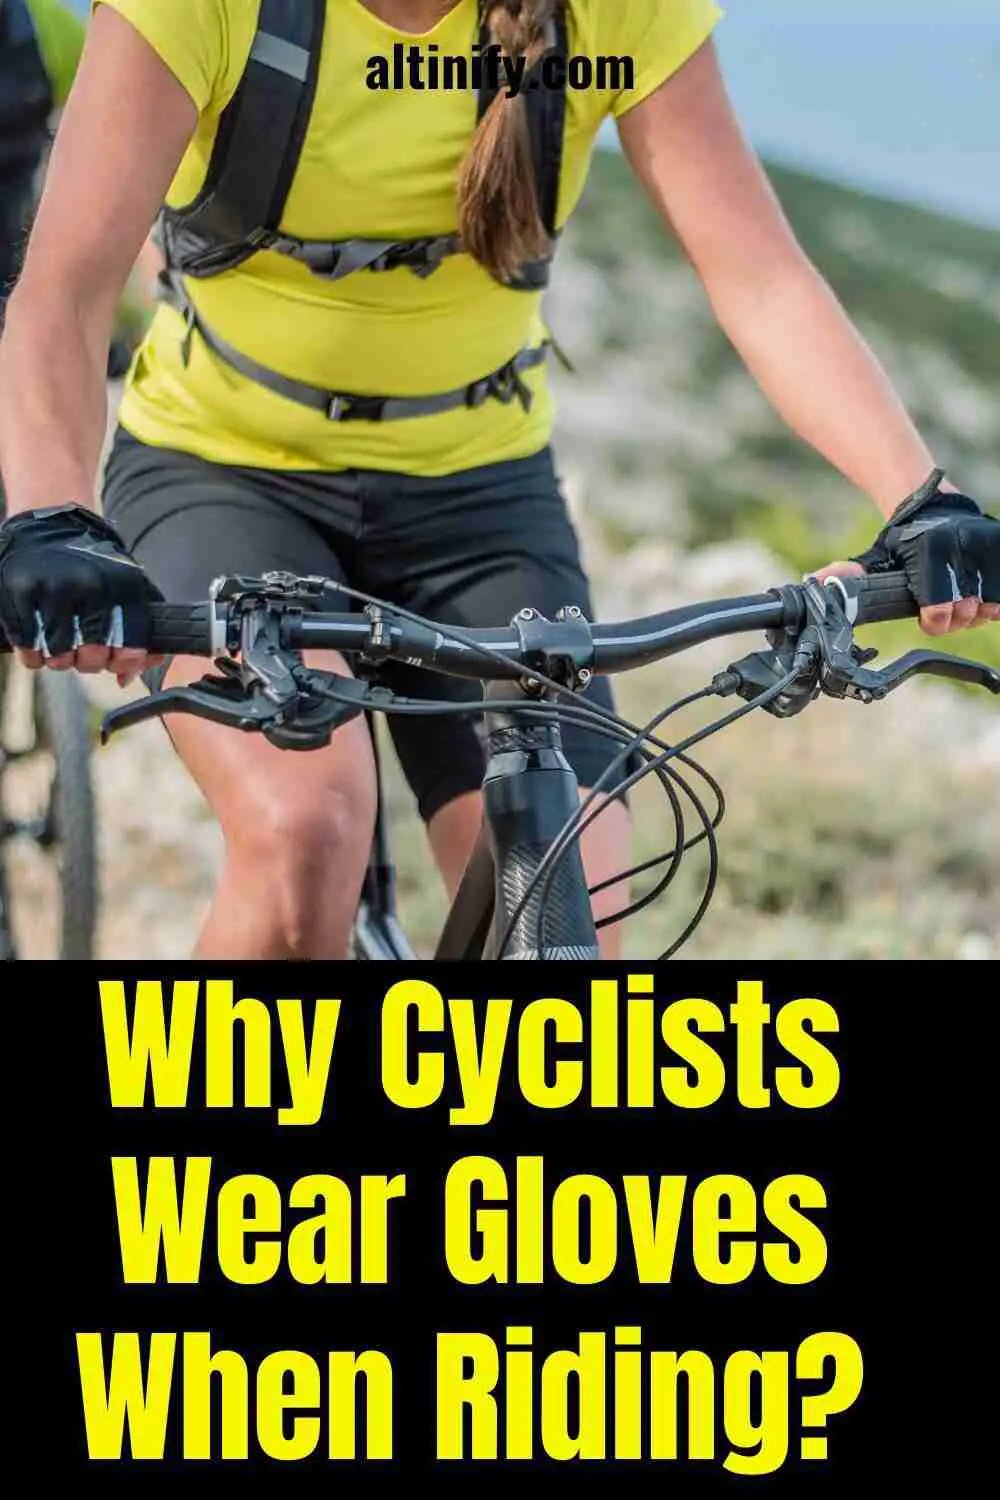 Why Cyclists Wear Gloves When Riding